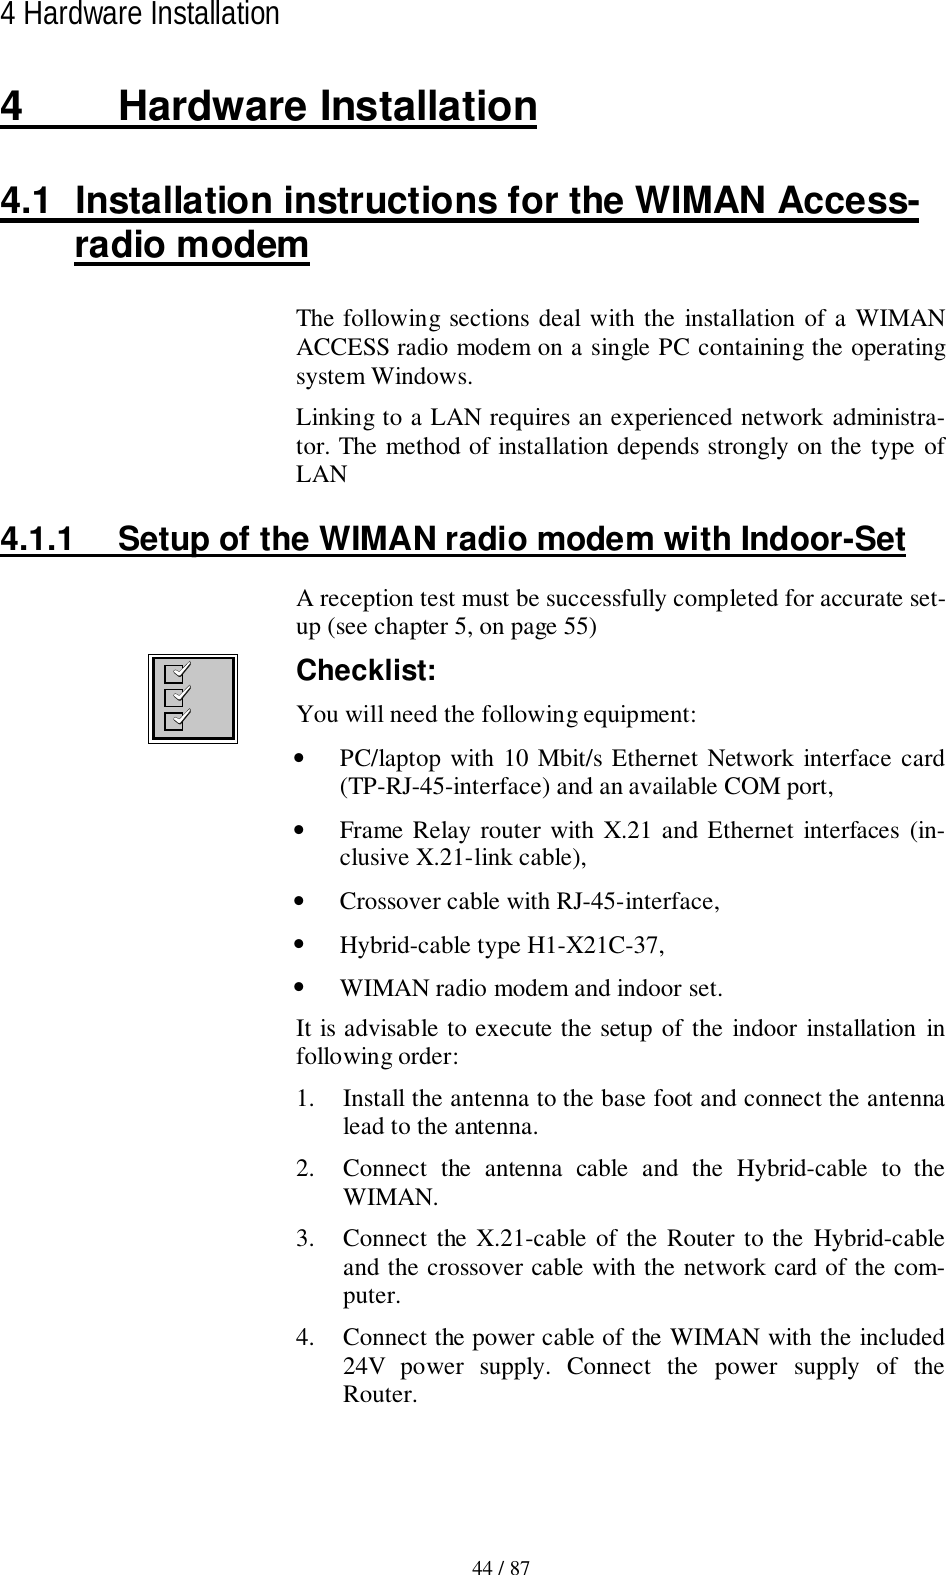 44 / 874 Hardware Installation4 Hardware Installation4.1  Installation instructions for the WIMAN Access-radio modemThe following sections deal with the installation of a WIMANACCESS radio modem on a single PC containing the operatingsystem Windows.Linking to a LAN requires an experienced network administra-tor. The method of installation depends strongly on the type ofLAN4.1.1  Setup of the WIMAN radio modem with Indoor-SetA reception test must be successfully completed for accurate set-up (see chapter 5, on page 55)Checklist:You will need the following equipment:• PC/laptop with 10 Mbit/s Ethernet Network interface card(TP-RJ-45-interface) and an available COM port,• Frame Relay router with X.21 and Ethernet interfaces (in-clusive X.21-link cable),• Crossover cable with RJ-45-interface,• Hybrid-cable type H1-X21C-37,• WIMAN radio modem and indoor set.It is advisable to execute the setup of the indoor installation infollowing order:1. Install the antenna to the base foot and connect the antennalead to the antenna.2. Connect the antenna cable and the Hybrid-cable to theWIMAN.3. Connect the X.21-cable of the Router to the Hybrid-cableand the crossover cable with the network card of the com-puter.4. Connect the power cable of the WIMAN with the included24V power supply. Connect the power supply of theRouter.